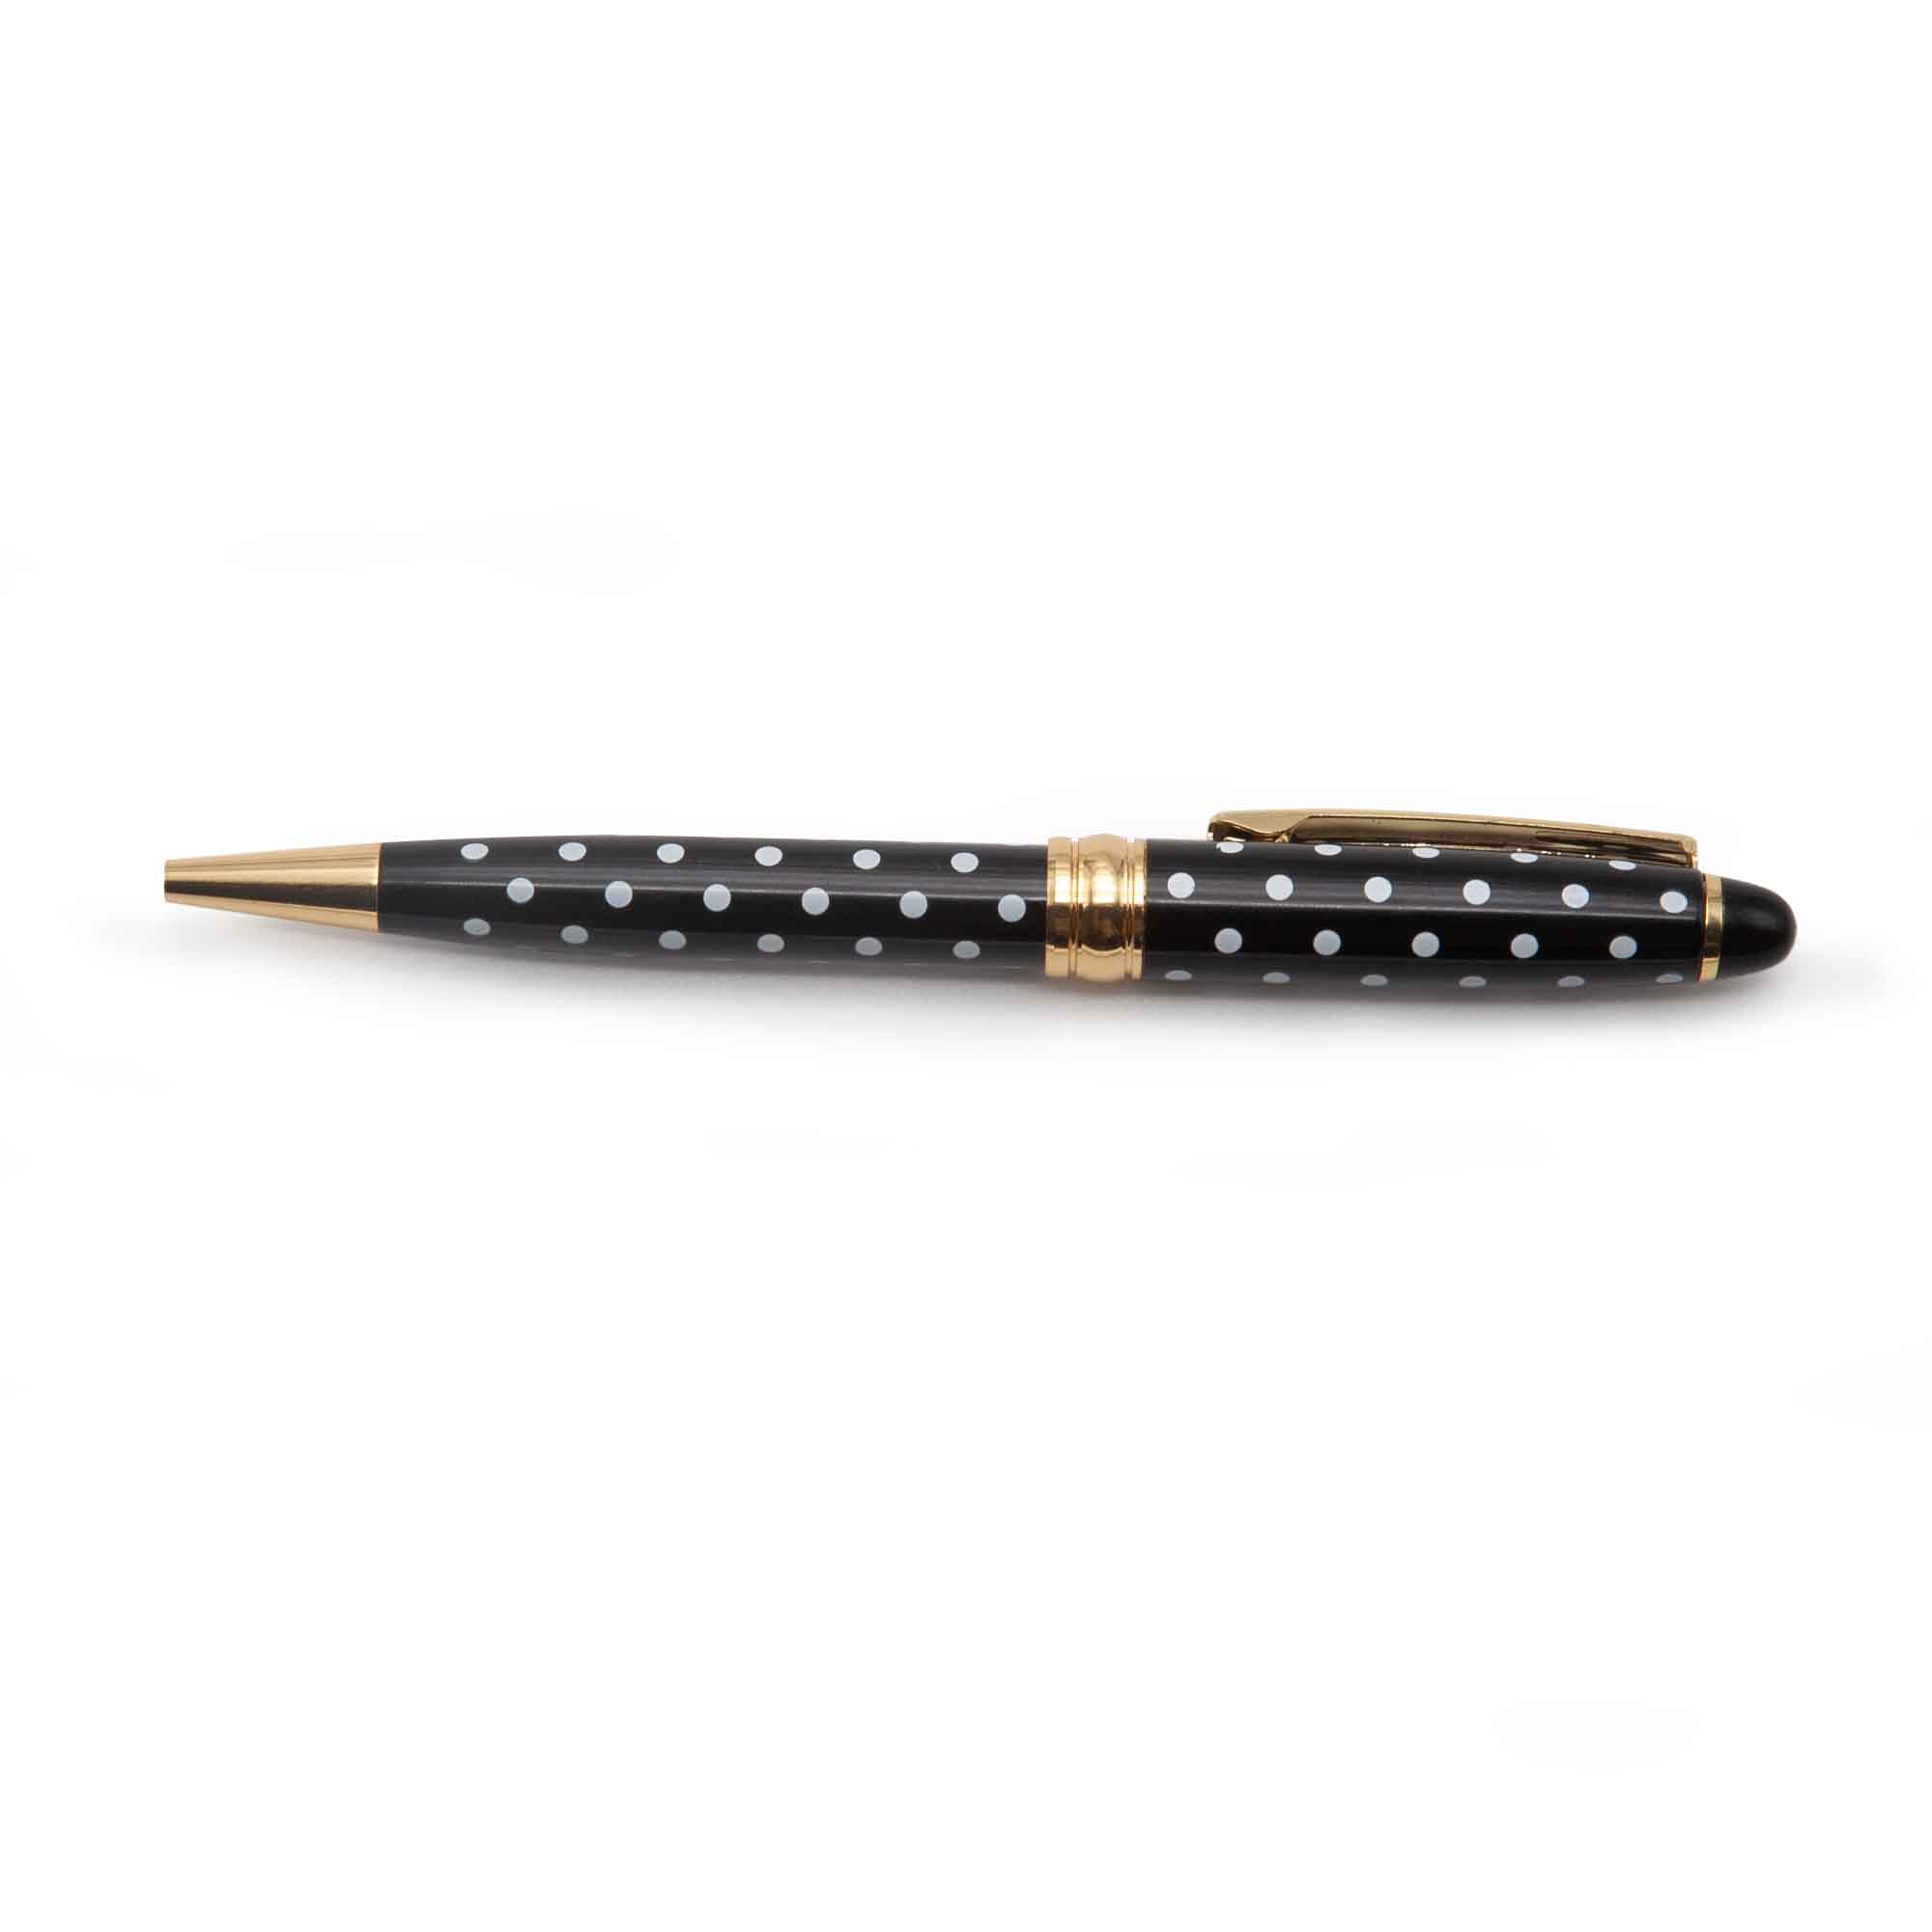 Image shows a black ballpoint pen with white polka dots